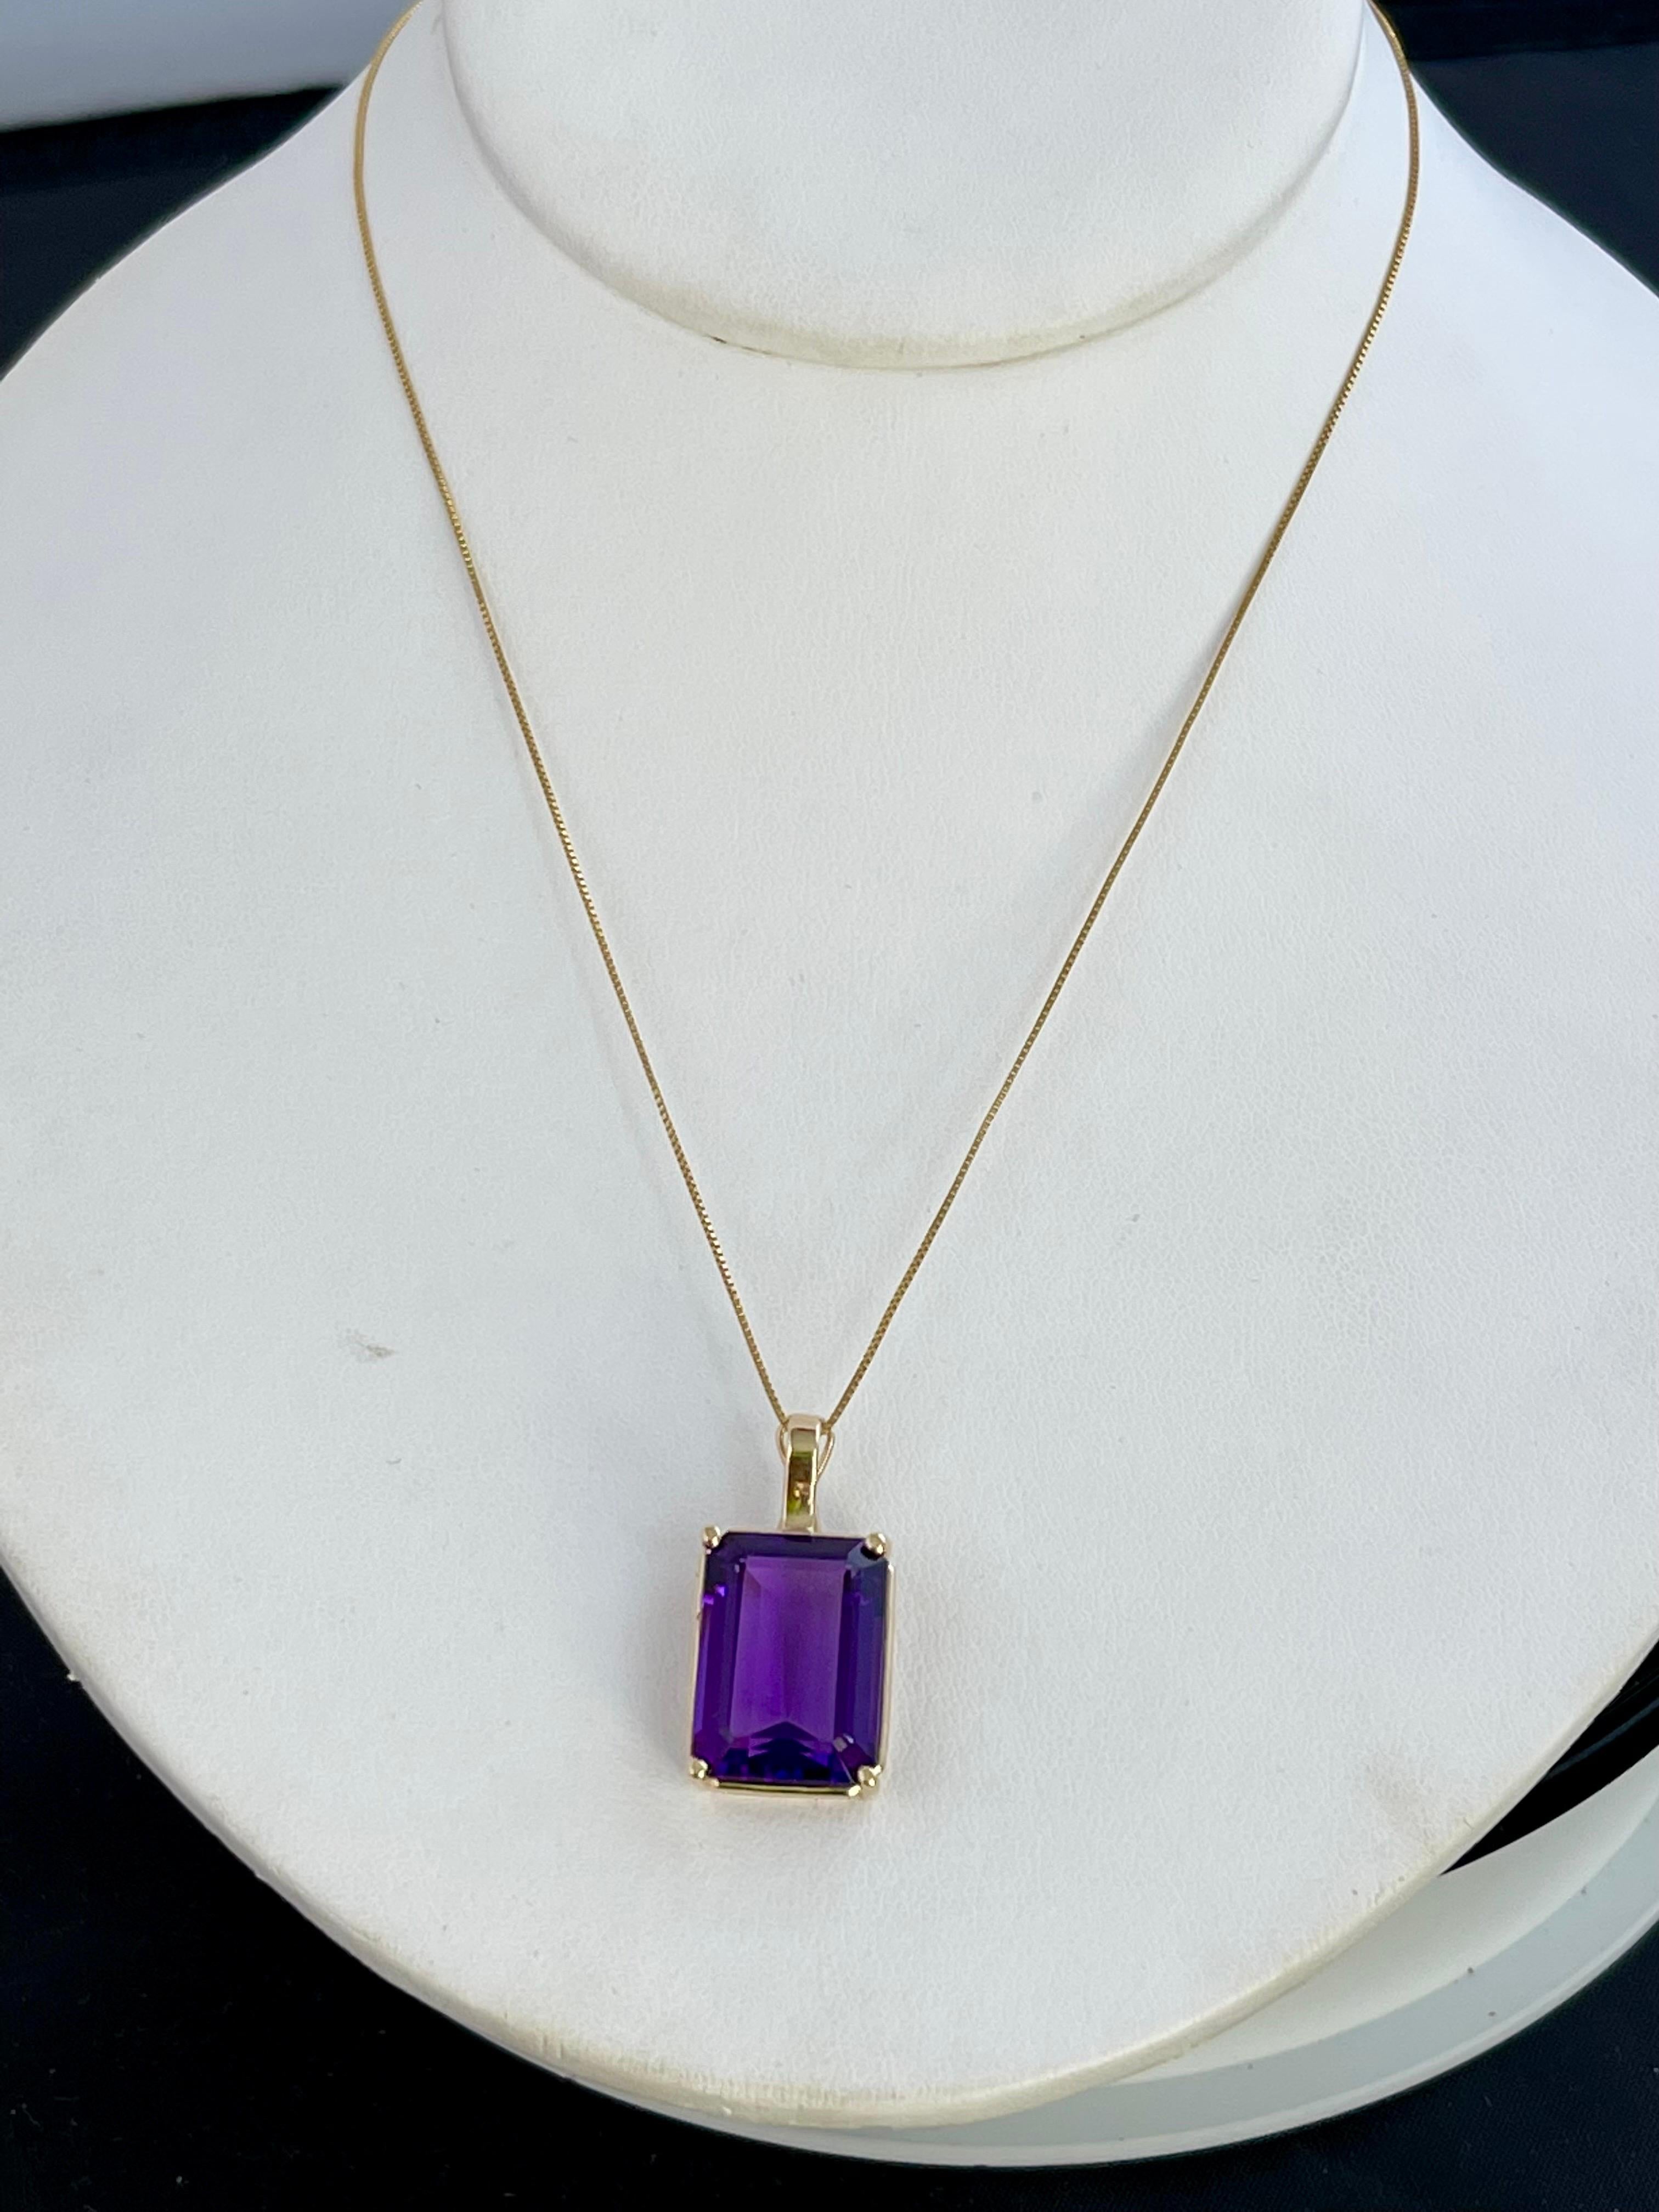 12 Ct Emerald Cut Amethyst Pendant /Necklace + 14 Kt Yellow Gold Chain Vintage For Sale 3